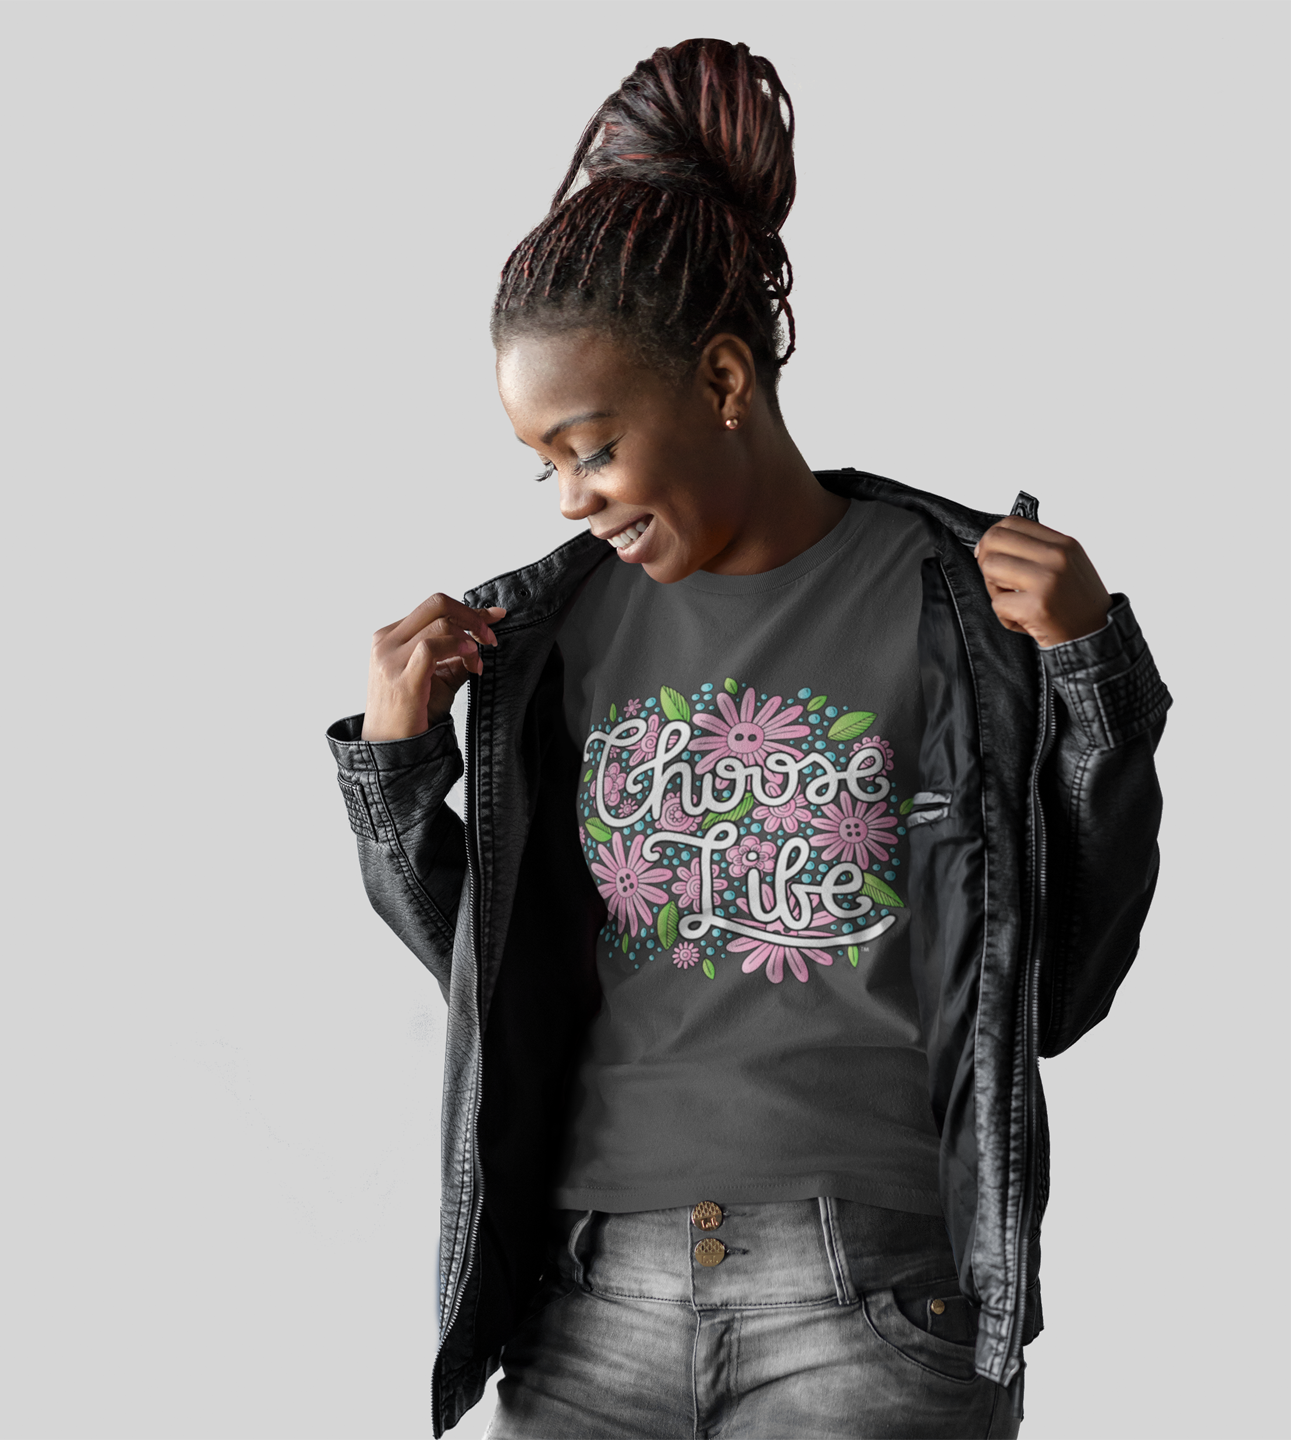 LifeCulture Apparel features hand-drawn designs with messages like "Choose Life" on the shirt above.